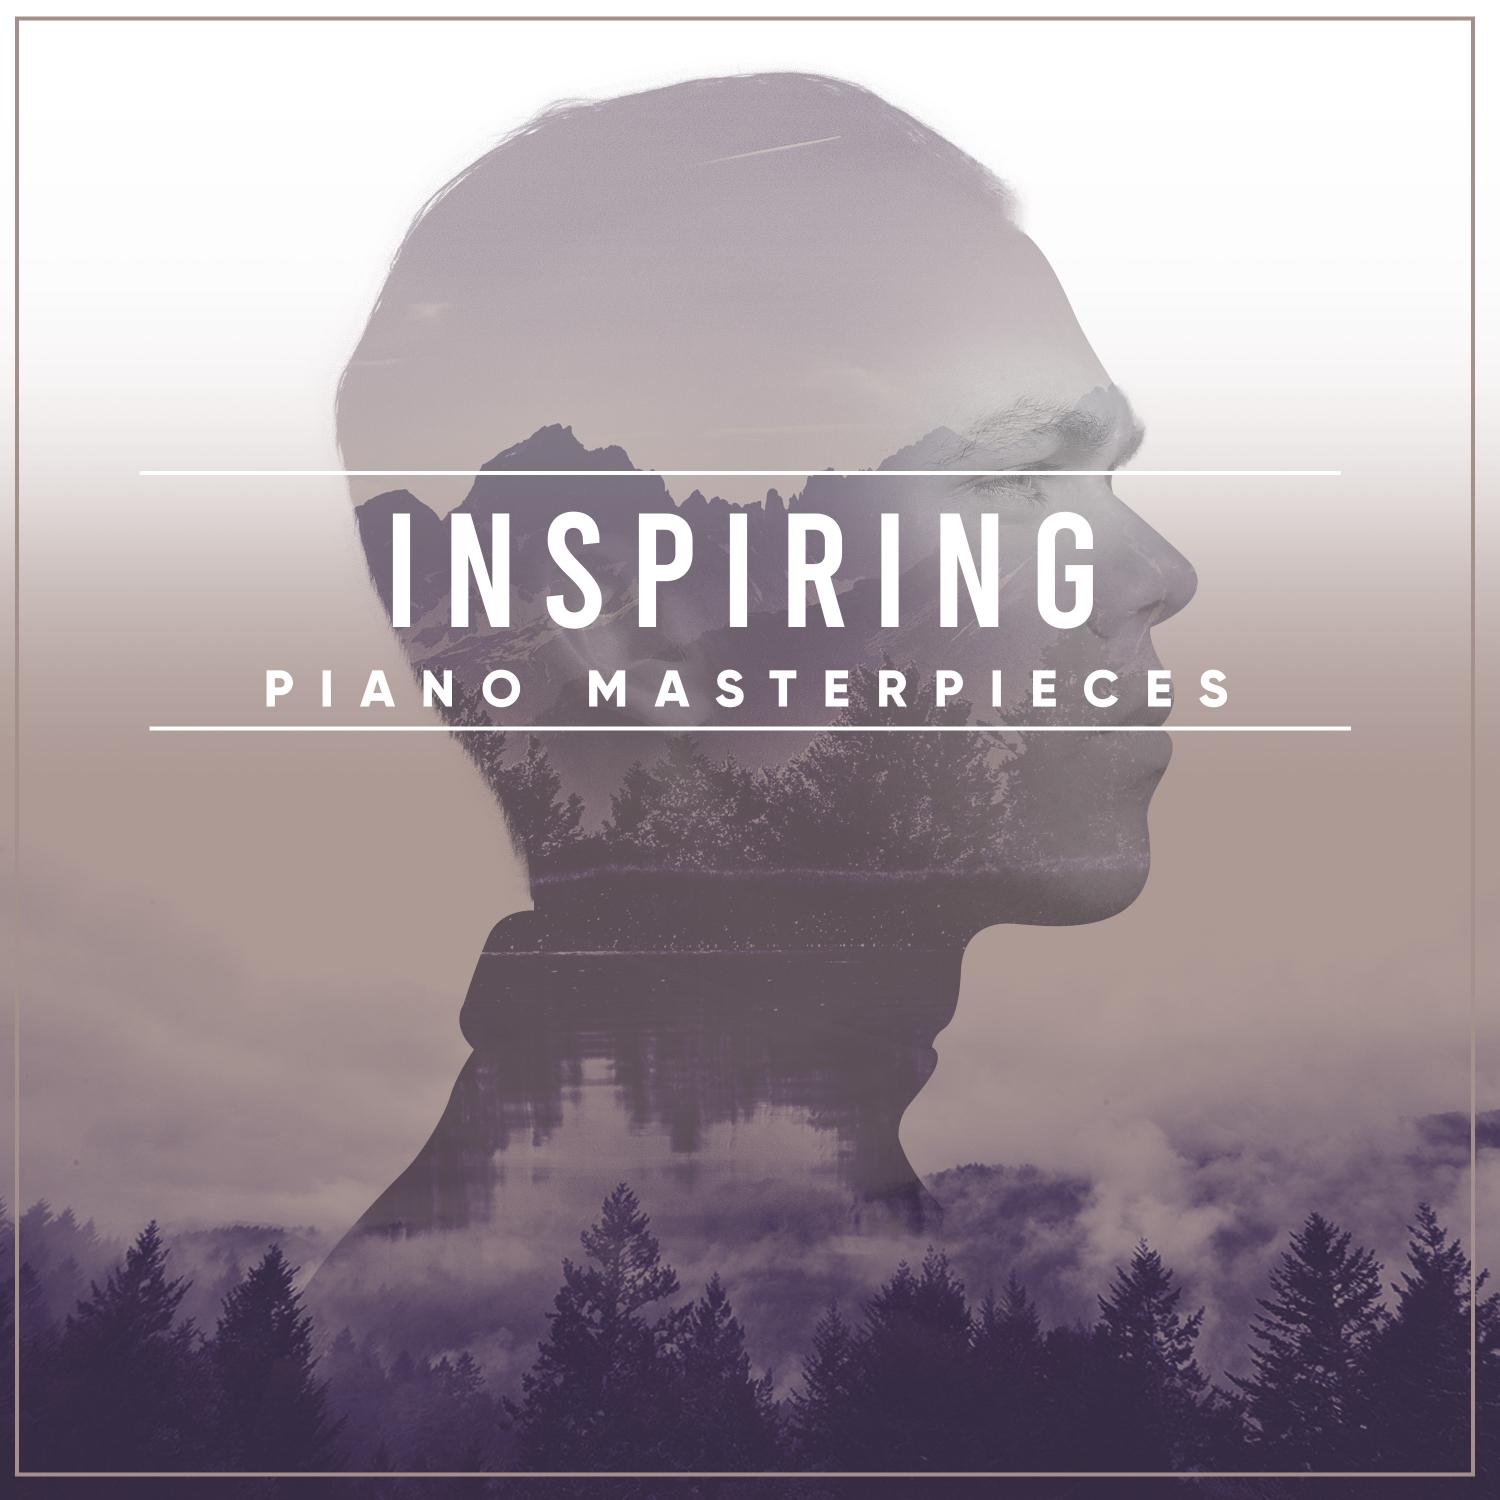 15 Inspiring Piano Masterpieces for Spa and Relaxation